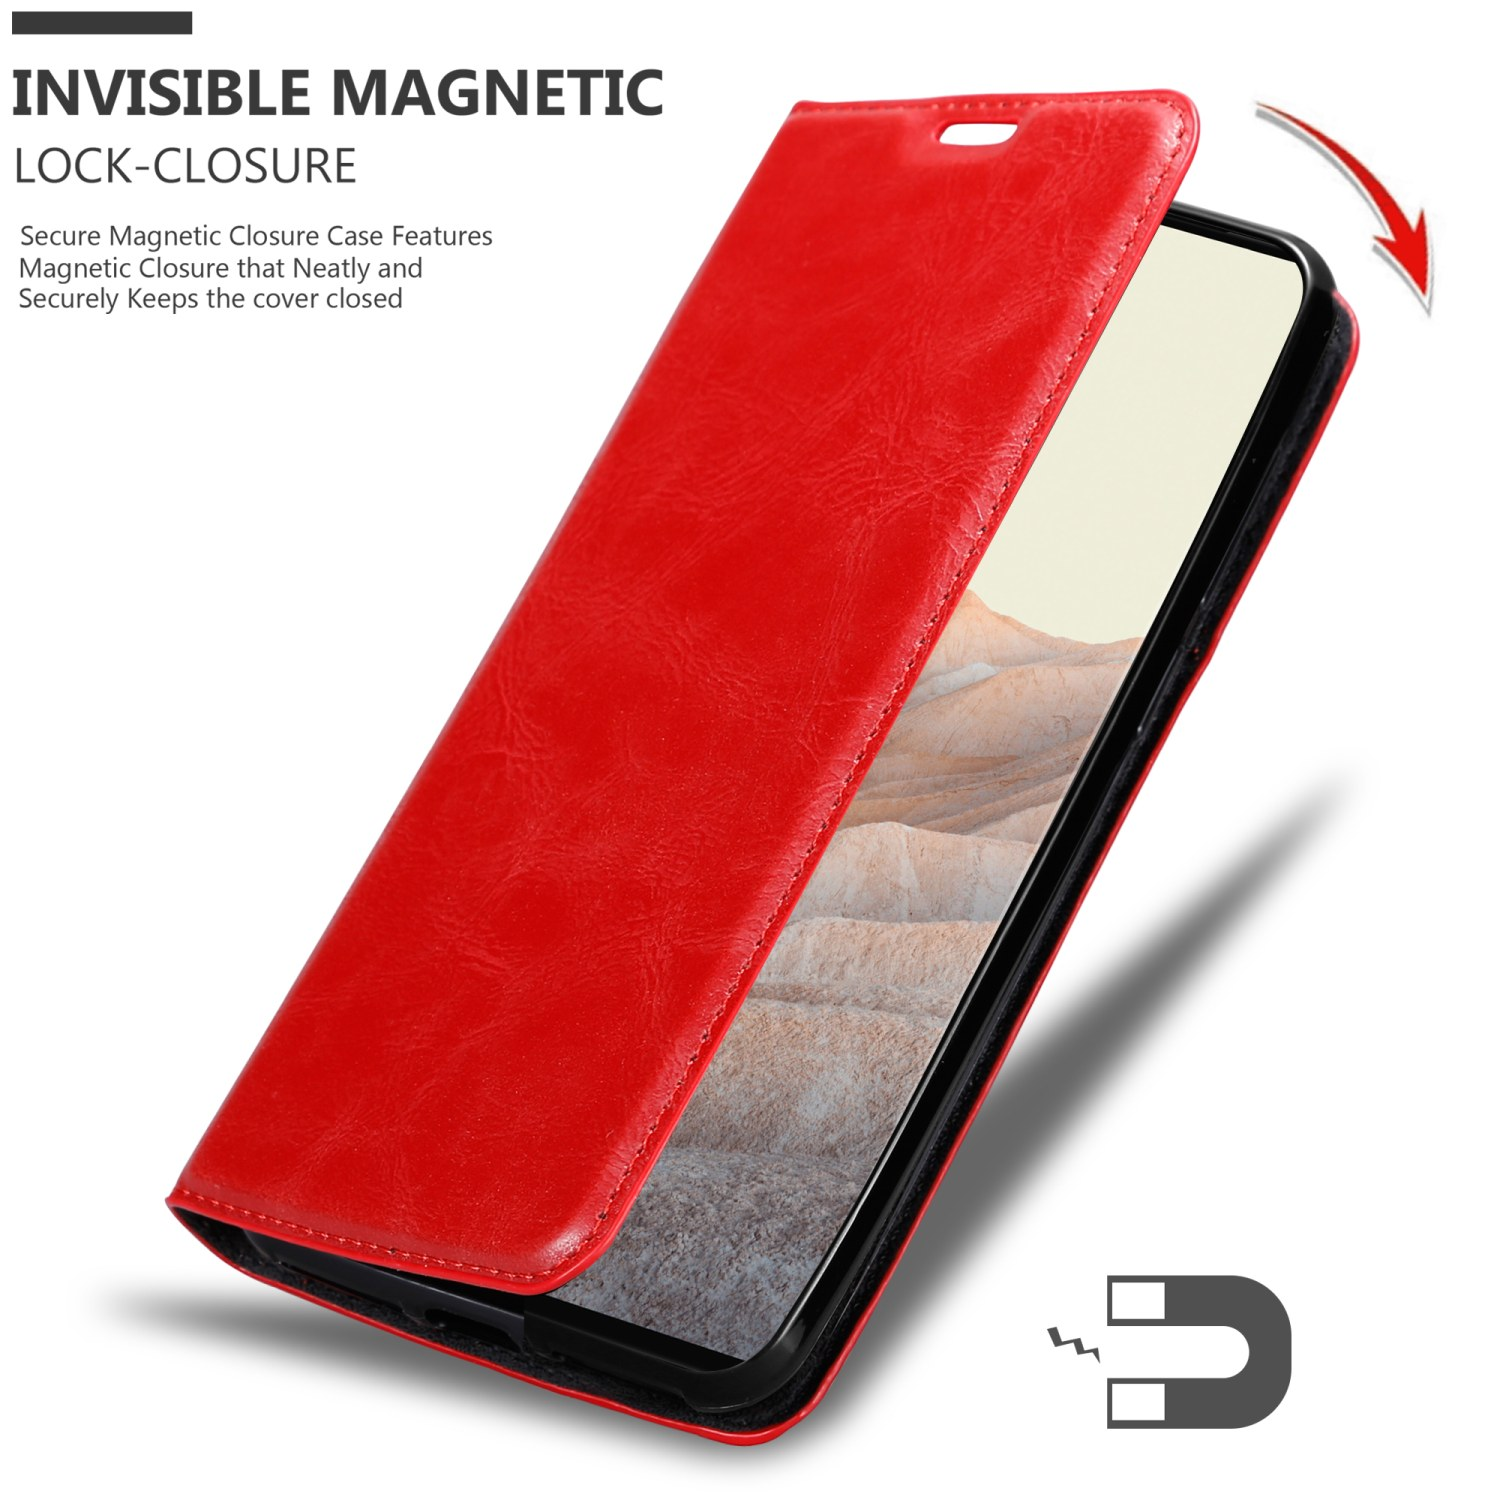 Bookcover, ROT Magnet, Google, Hülle PIXEL Book CADORABO APFEL 6 Invisible PRO,